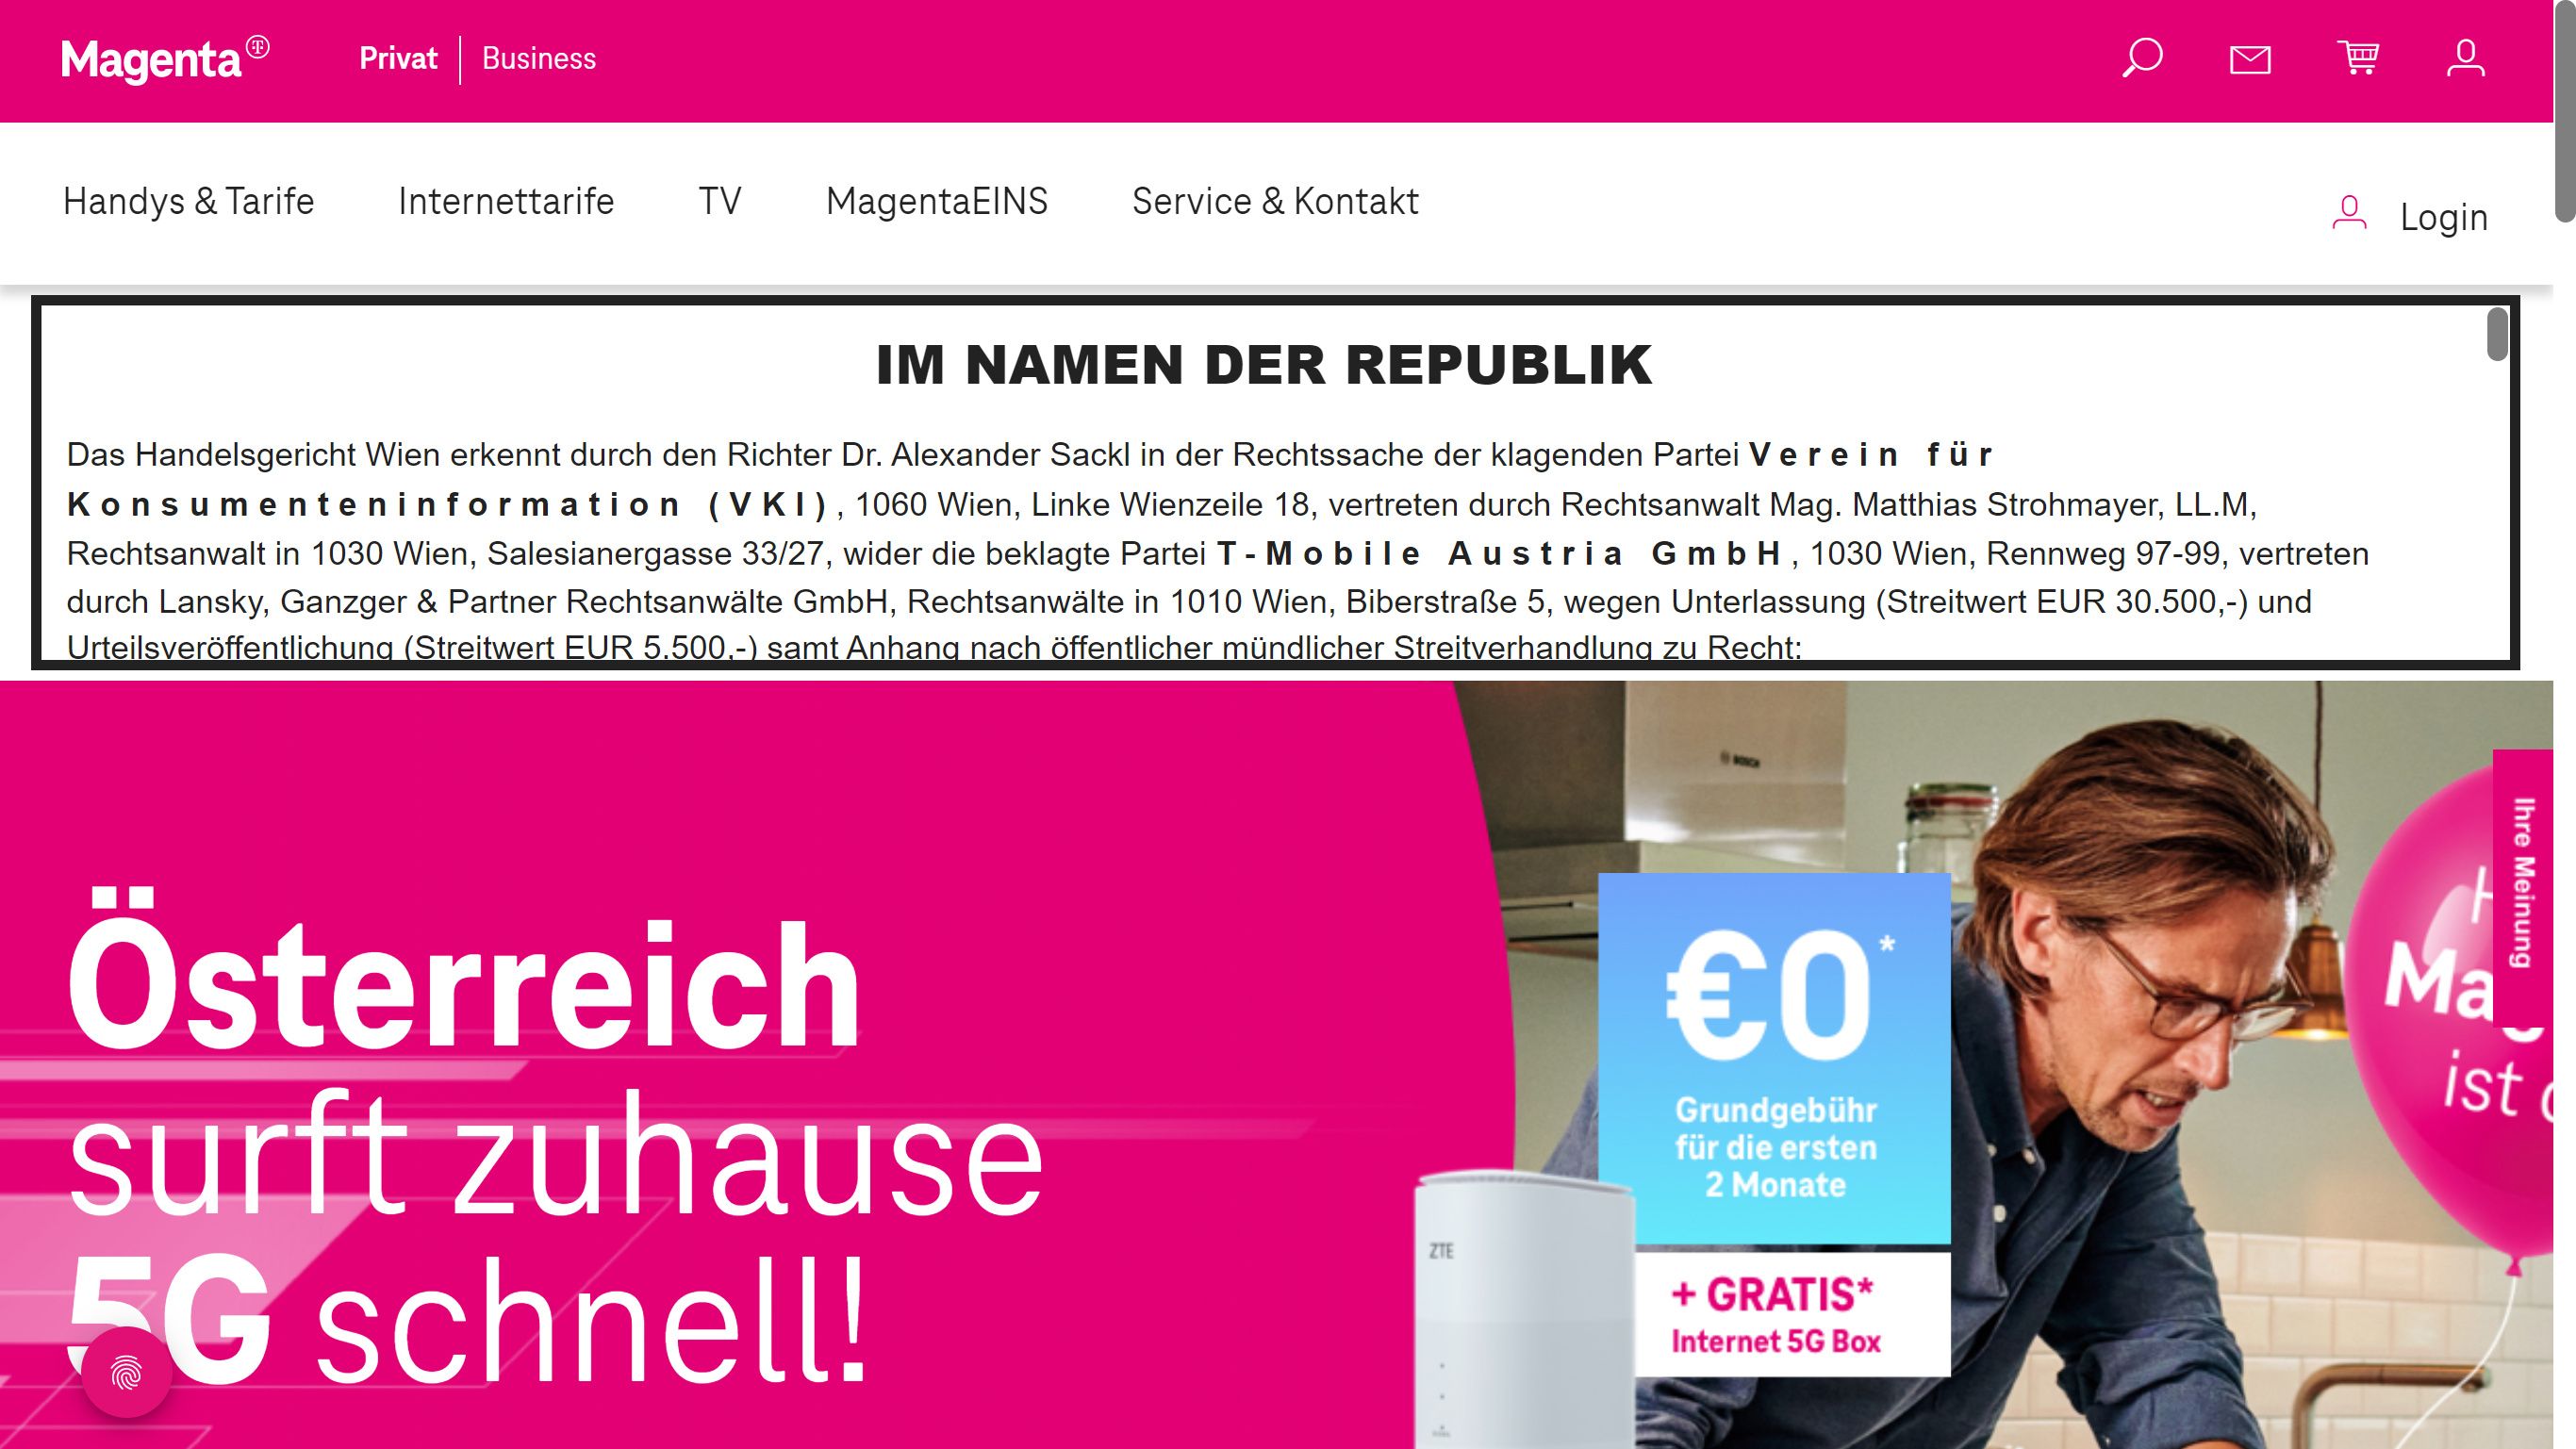 @vikisecrets/mobile-operator-t-mobile-magenta-in-austria-was-charged-for-false-advertisement-free-was-not-actually-free